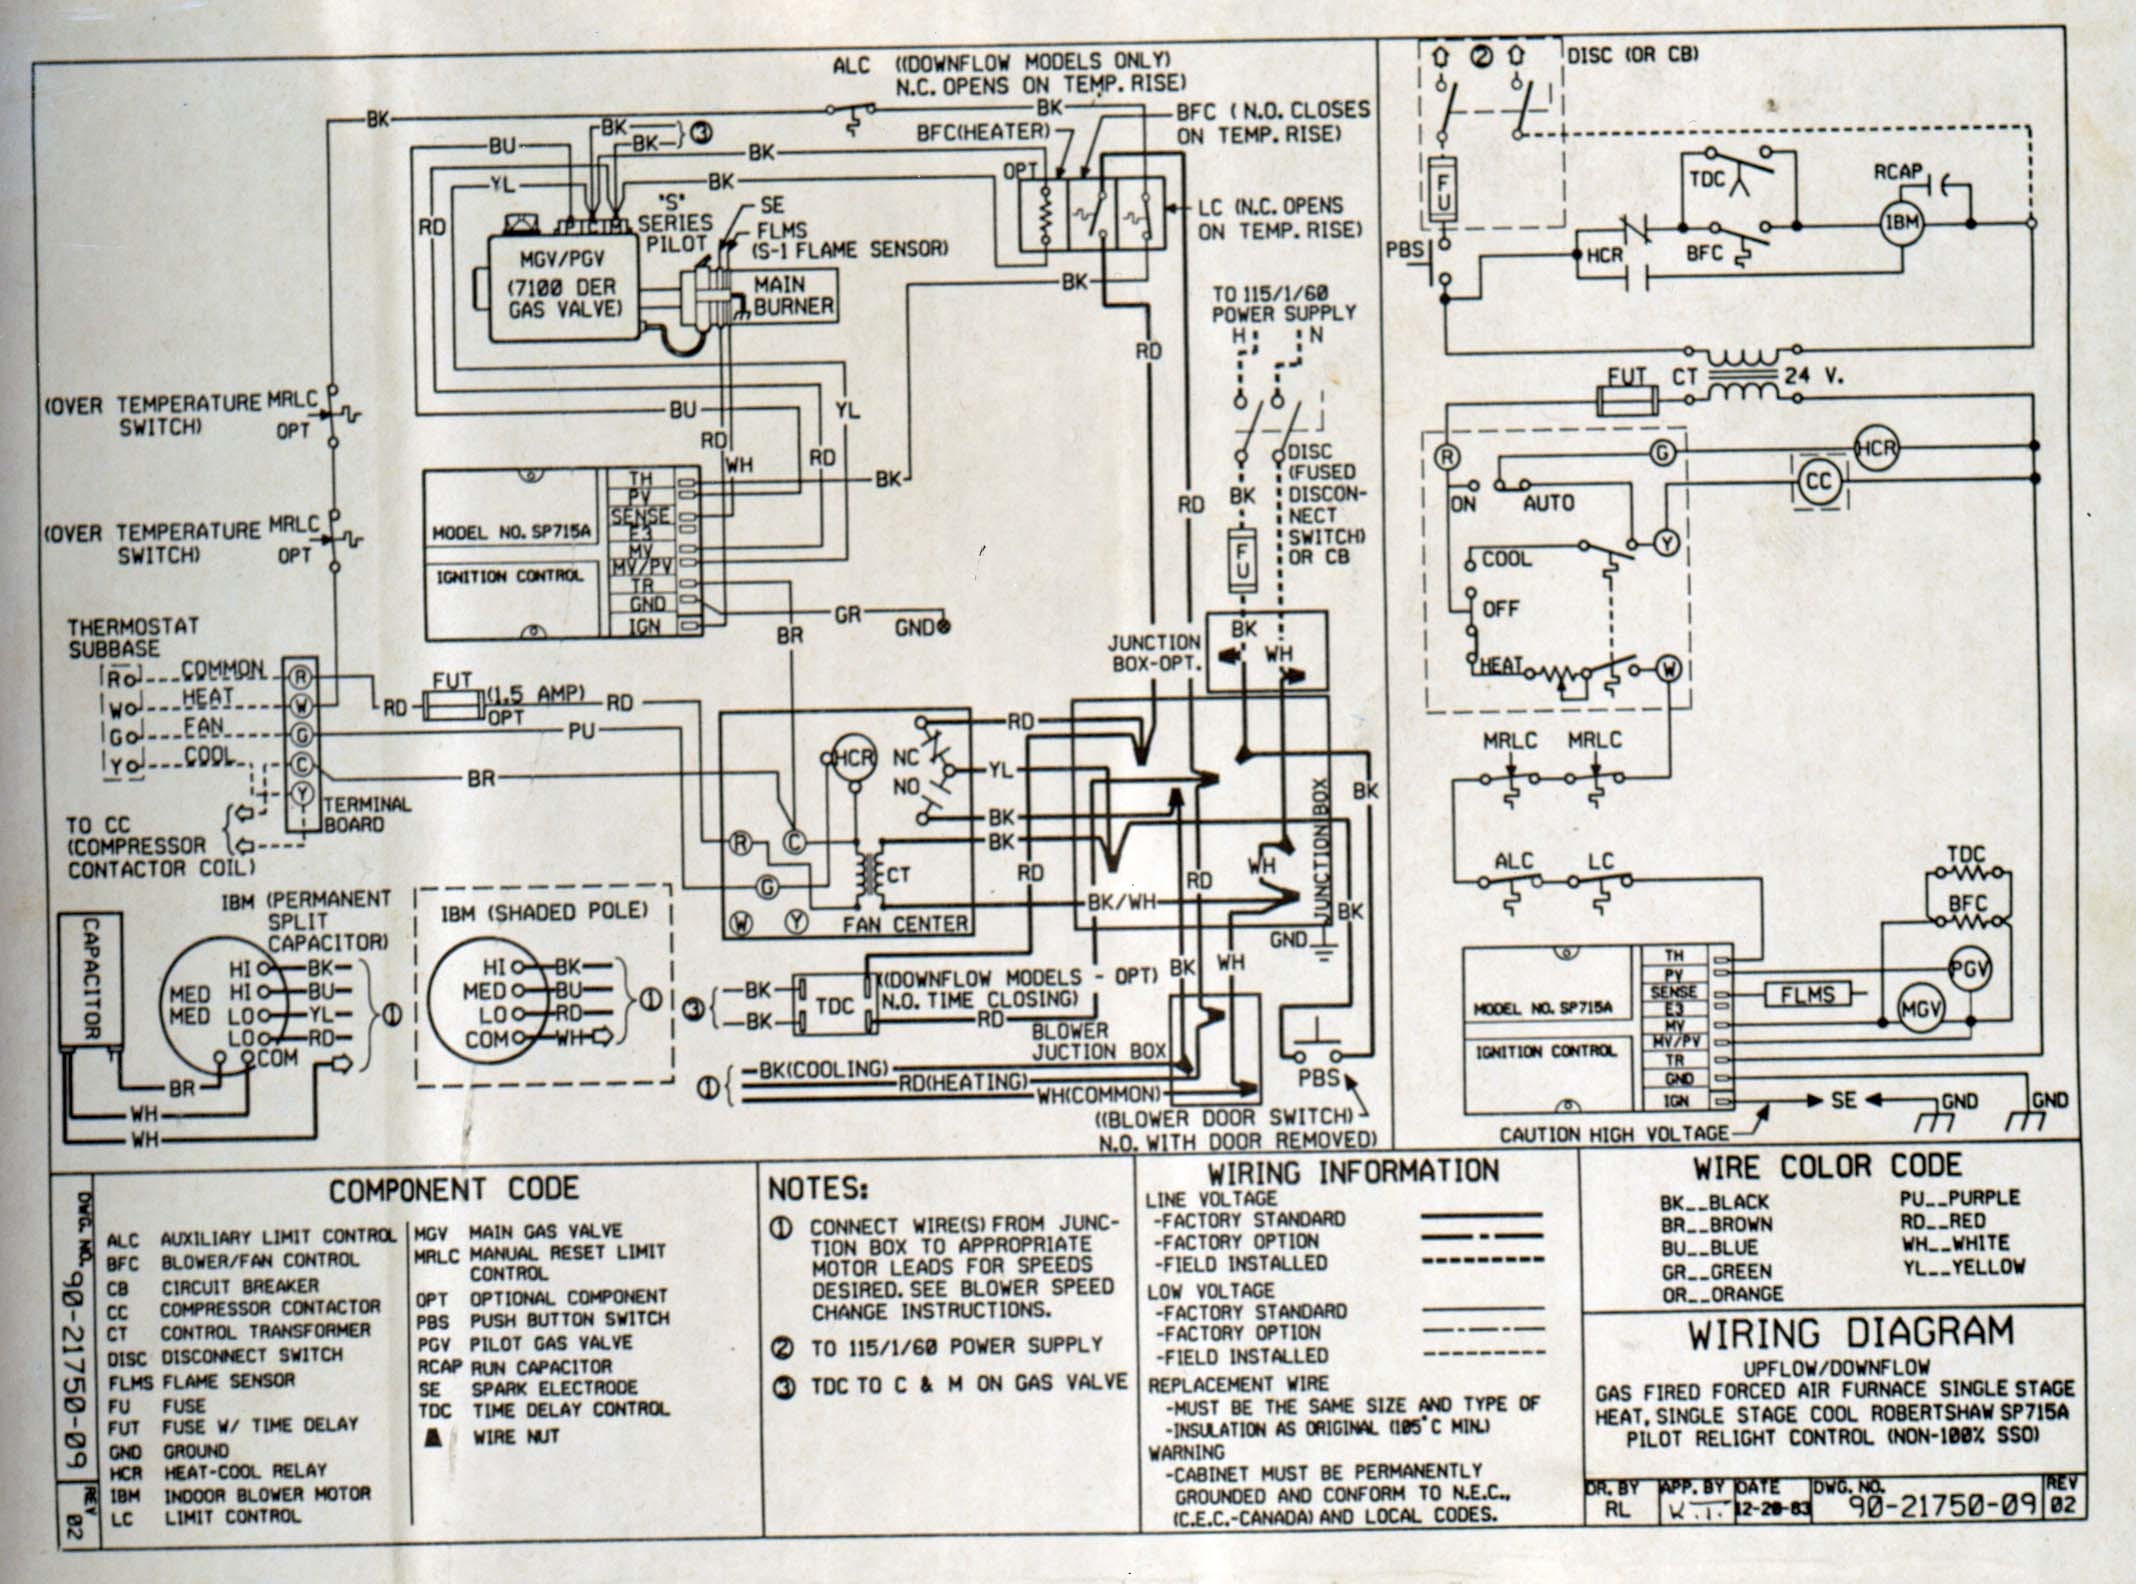 Trane Electric Furnace Wiring Diagram New Wiring Diagram For Goodman Furnace The With Trane Air Conditioner